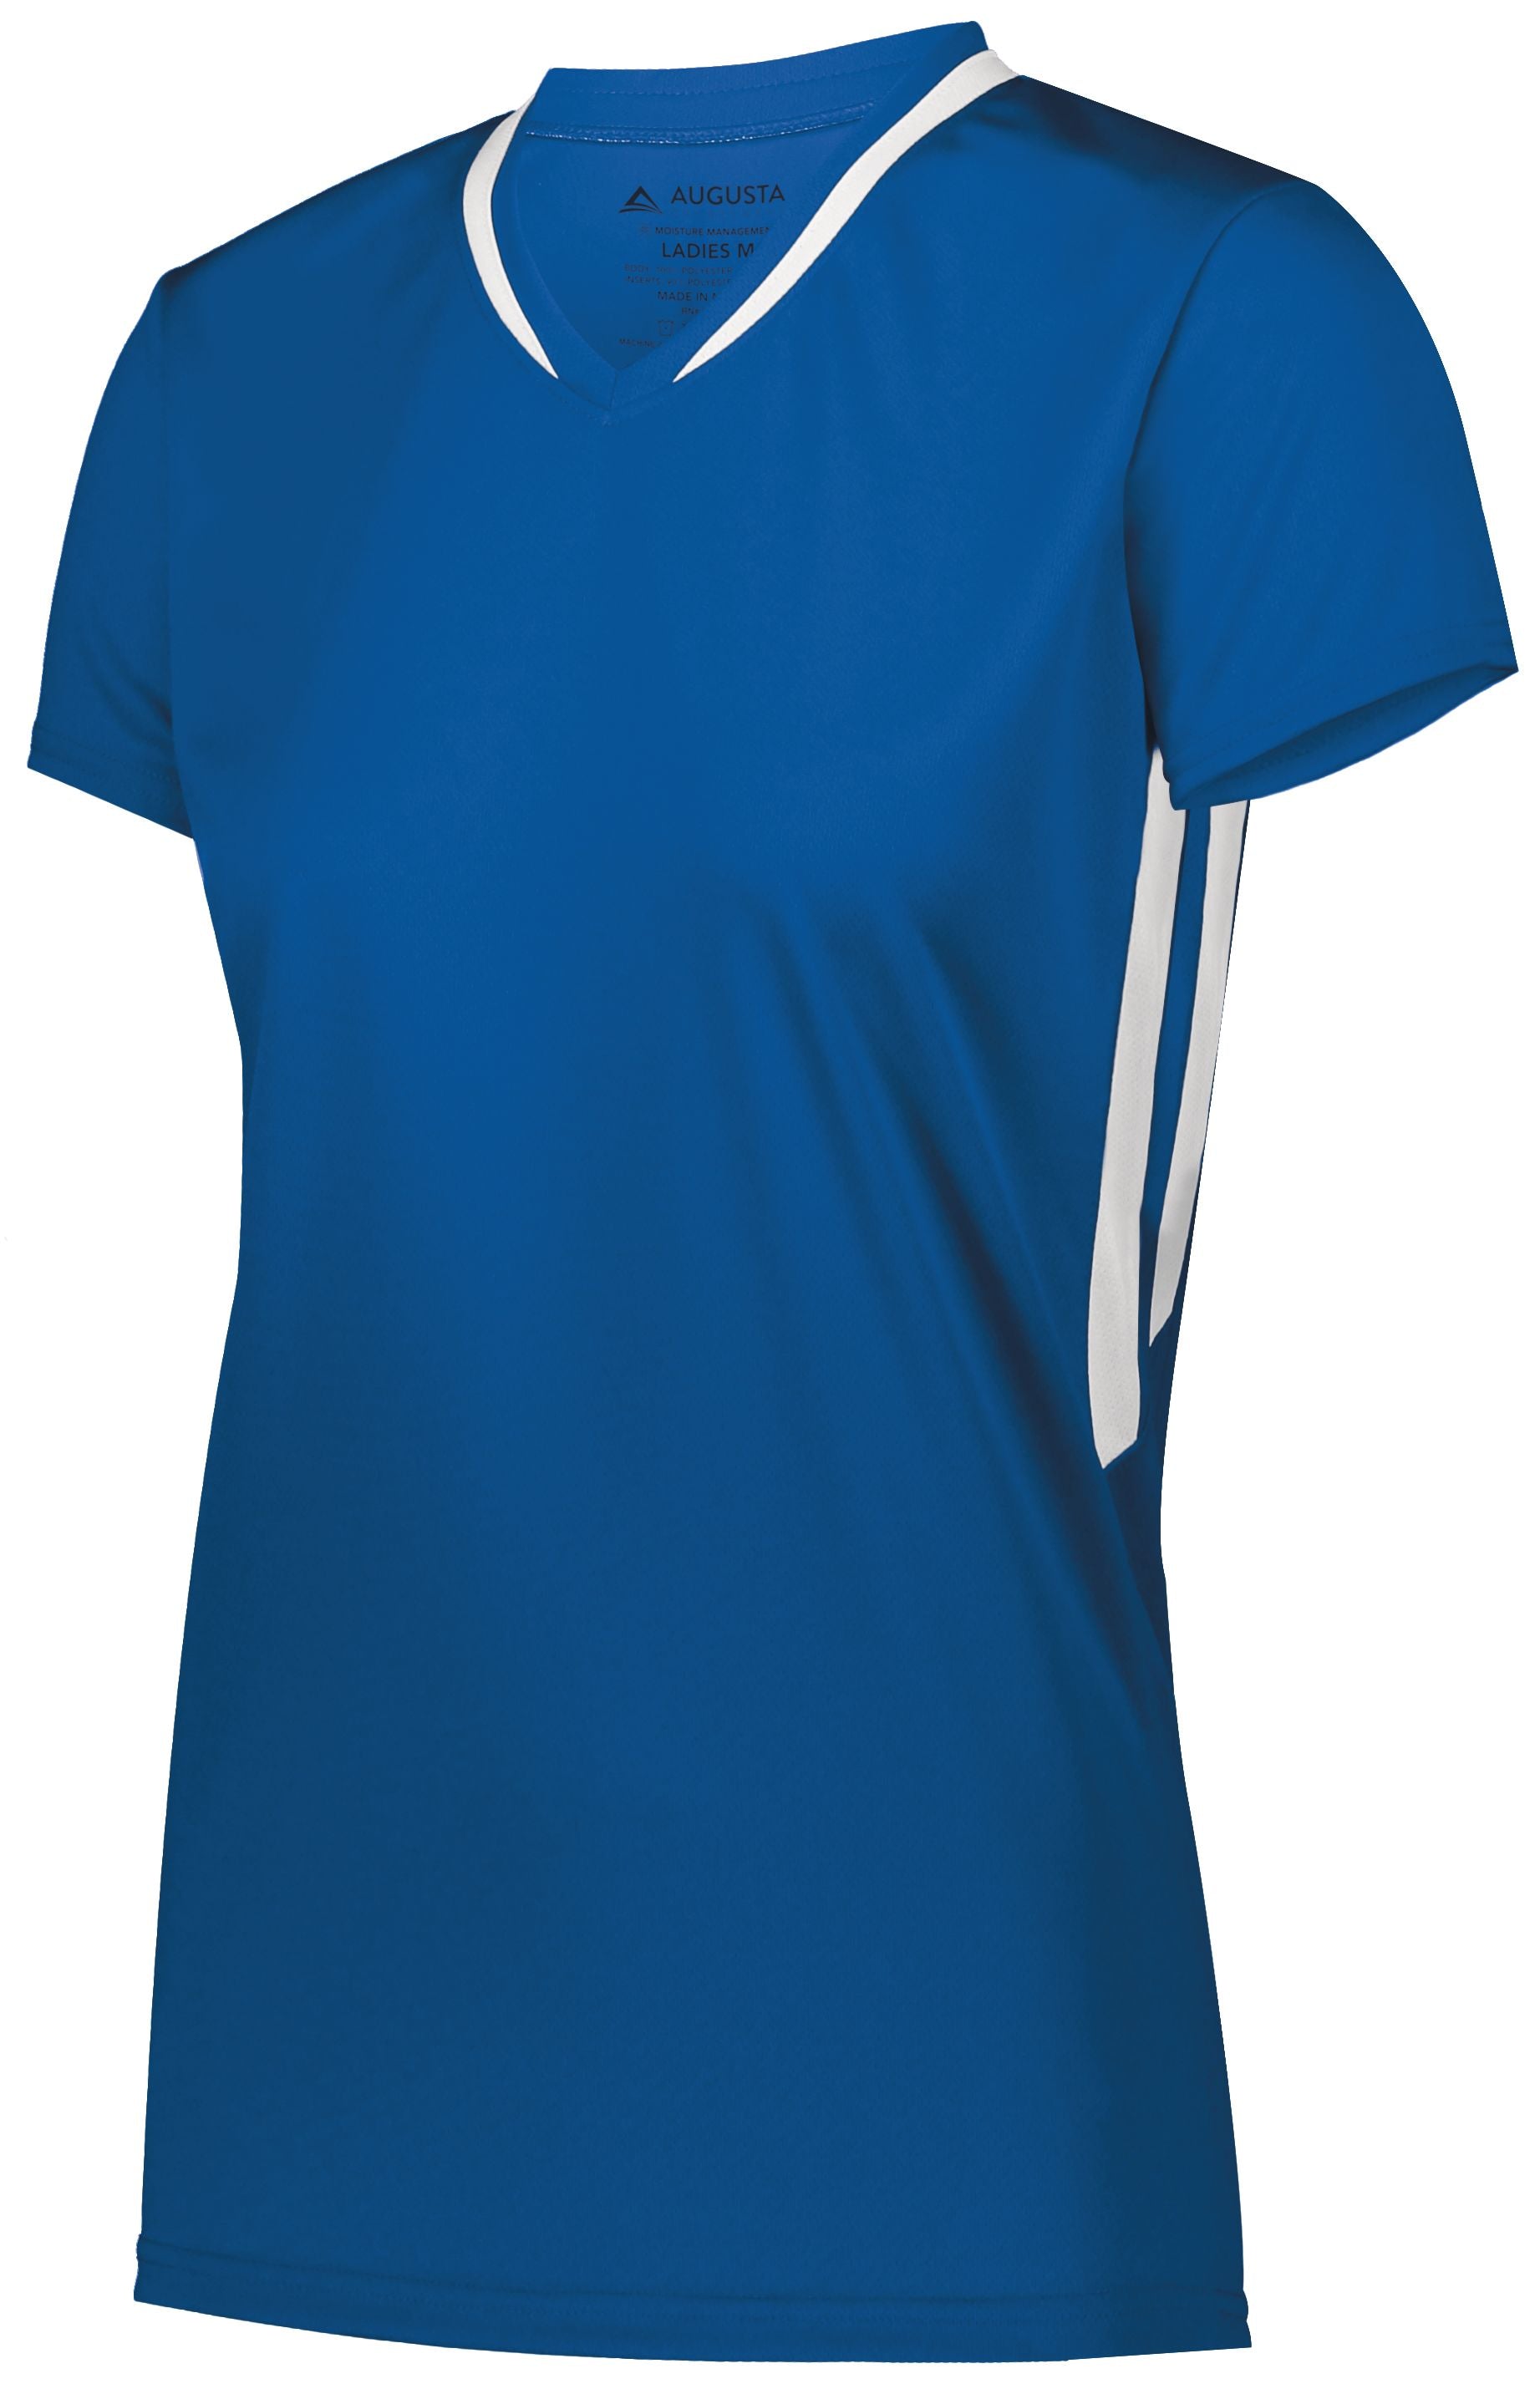 Augusta Sportswear Ladies Full Force Short Sleeve Jersey in Royal/White  -Part of the Ladies, Ladies-Jersey, Augusta-Products, Lacrosse, Shirts, All-Sports, All-Sports-1 product lines at KanaleyCreations.com